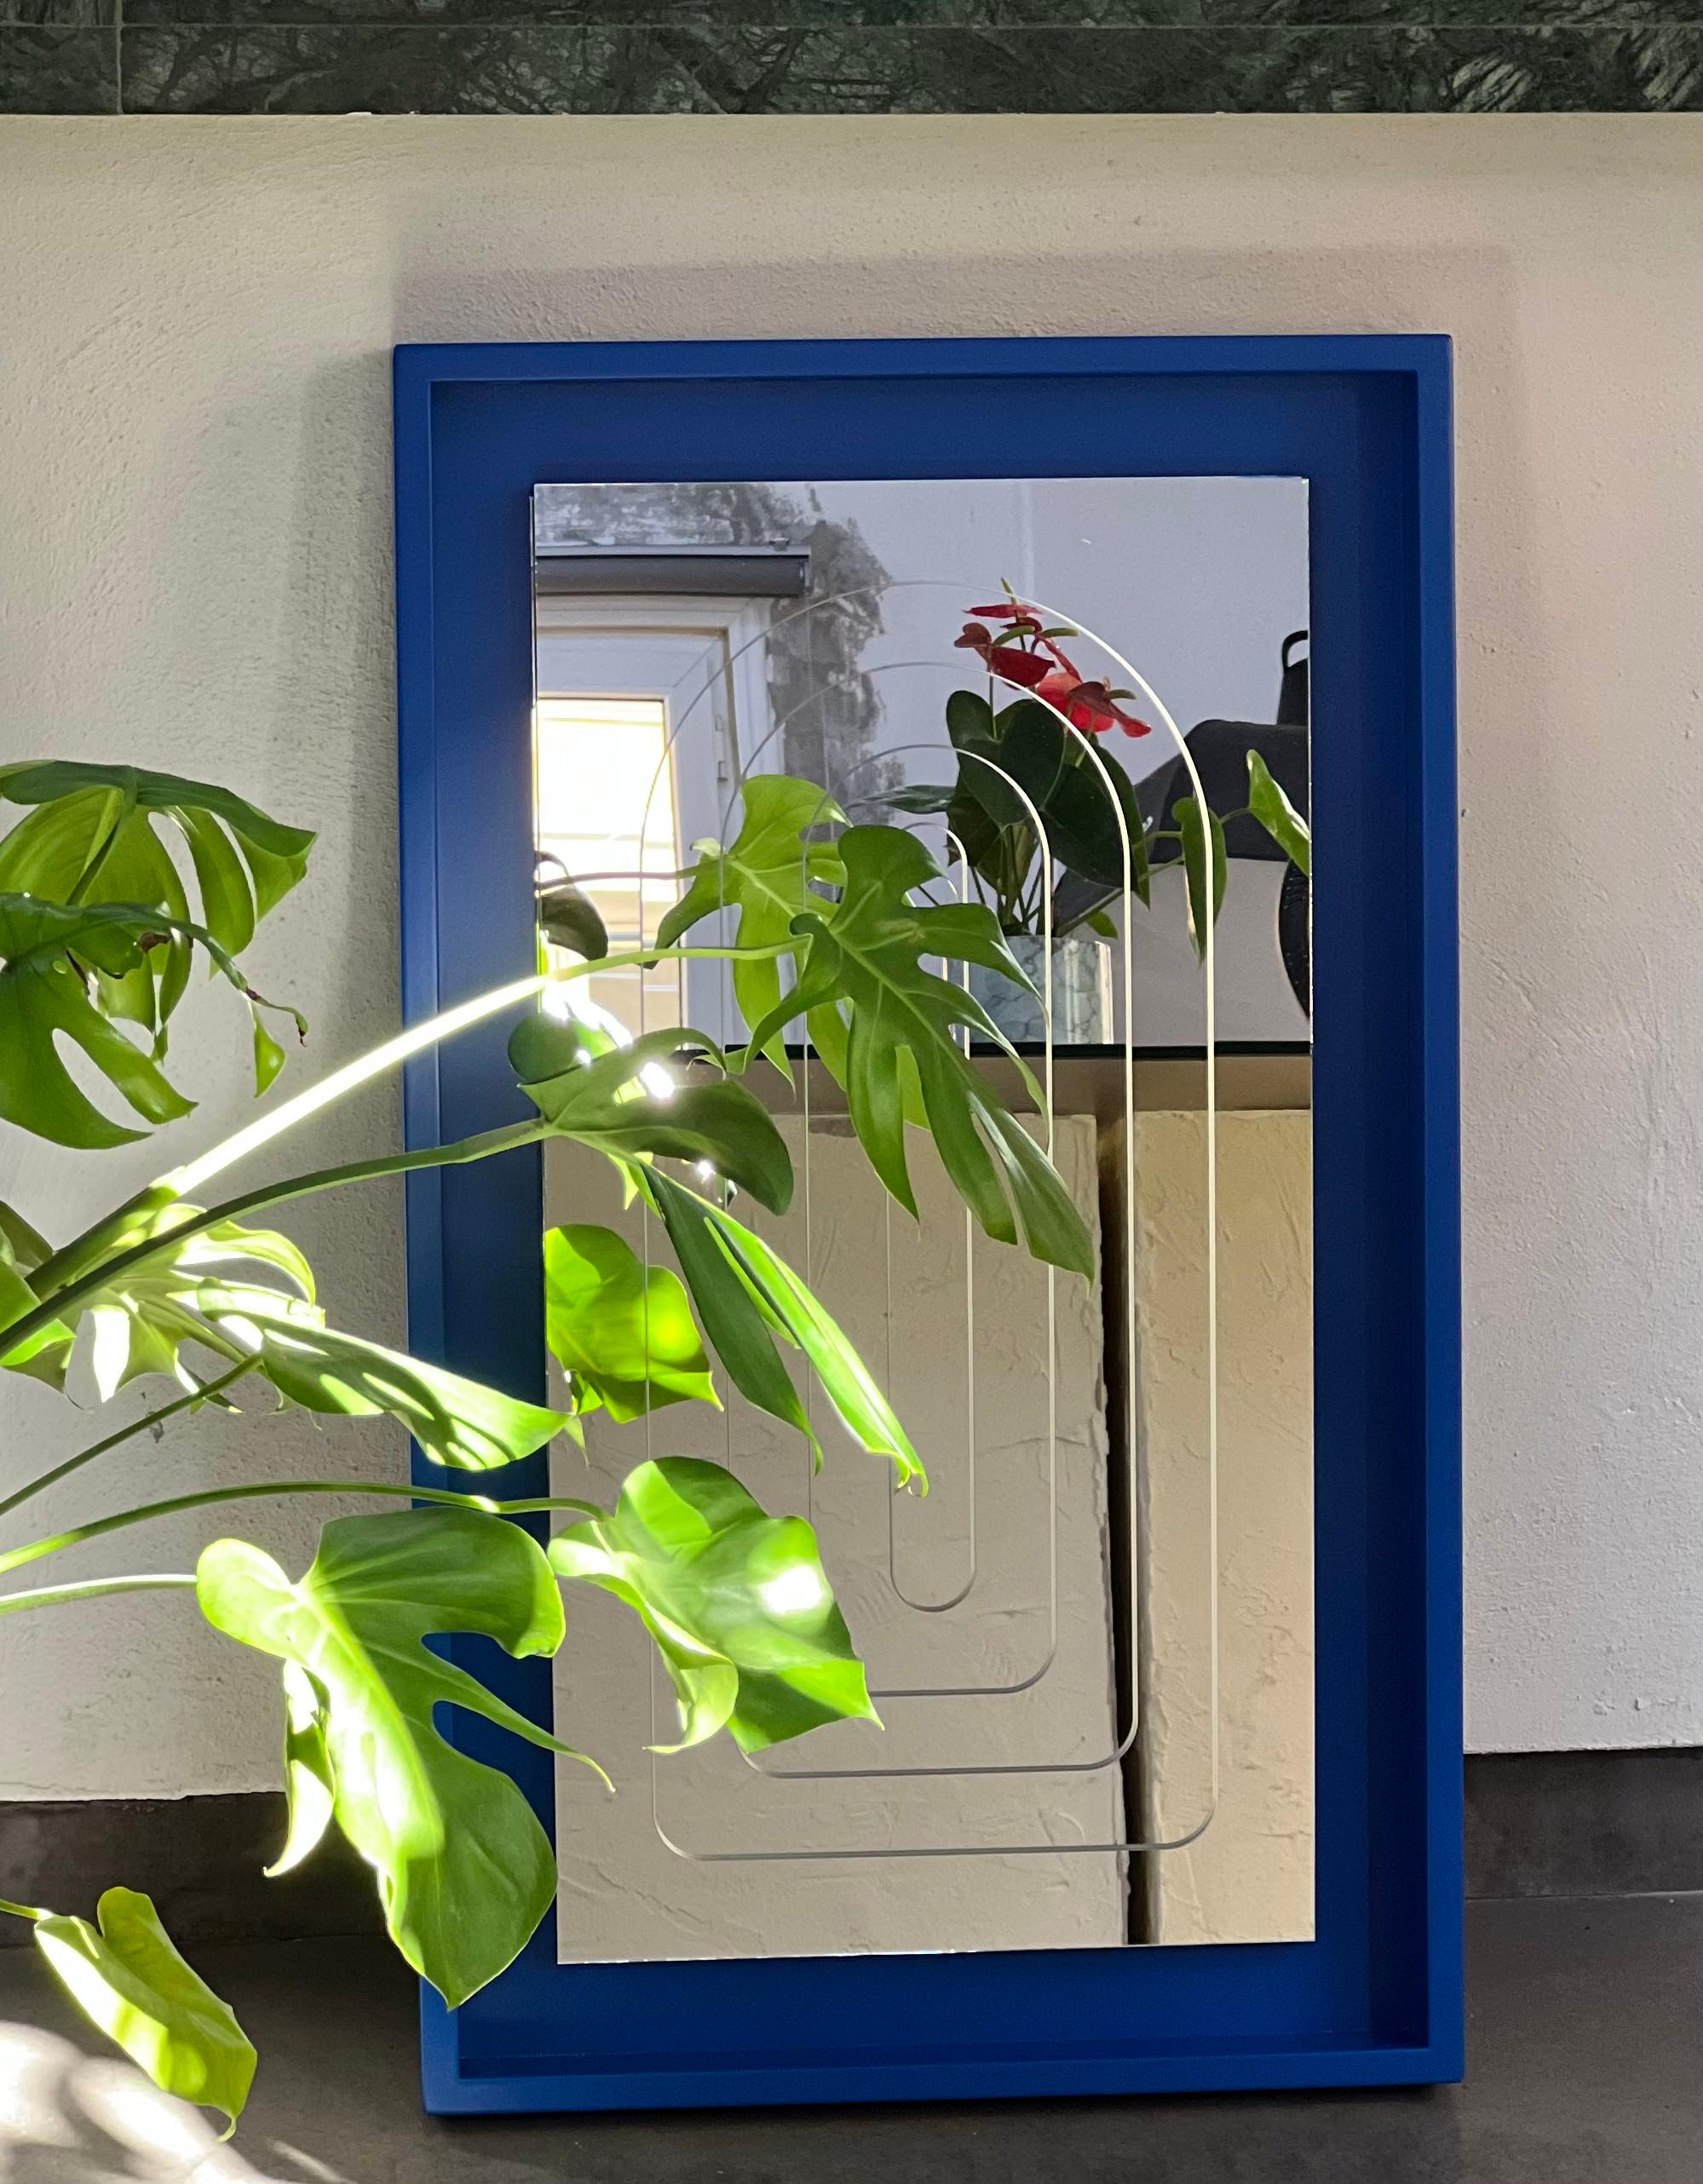 Designer: Selkan SOLMAZ ERÇEL 

Marrakech mirror is the design of designer's cities collection.
It is inspired by Marrakech city’s colourful street and form of arch door. It reflects Marrakech traditional's sense and modern design